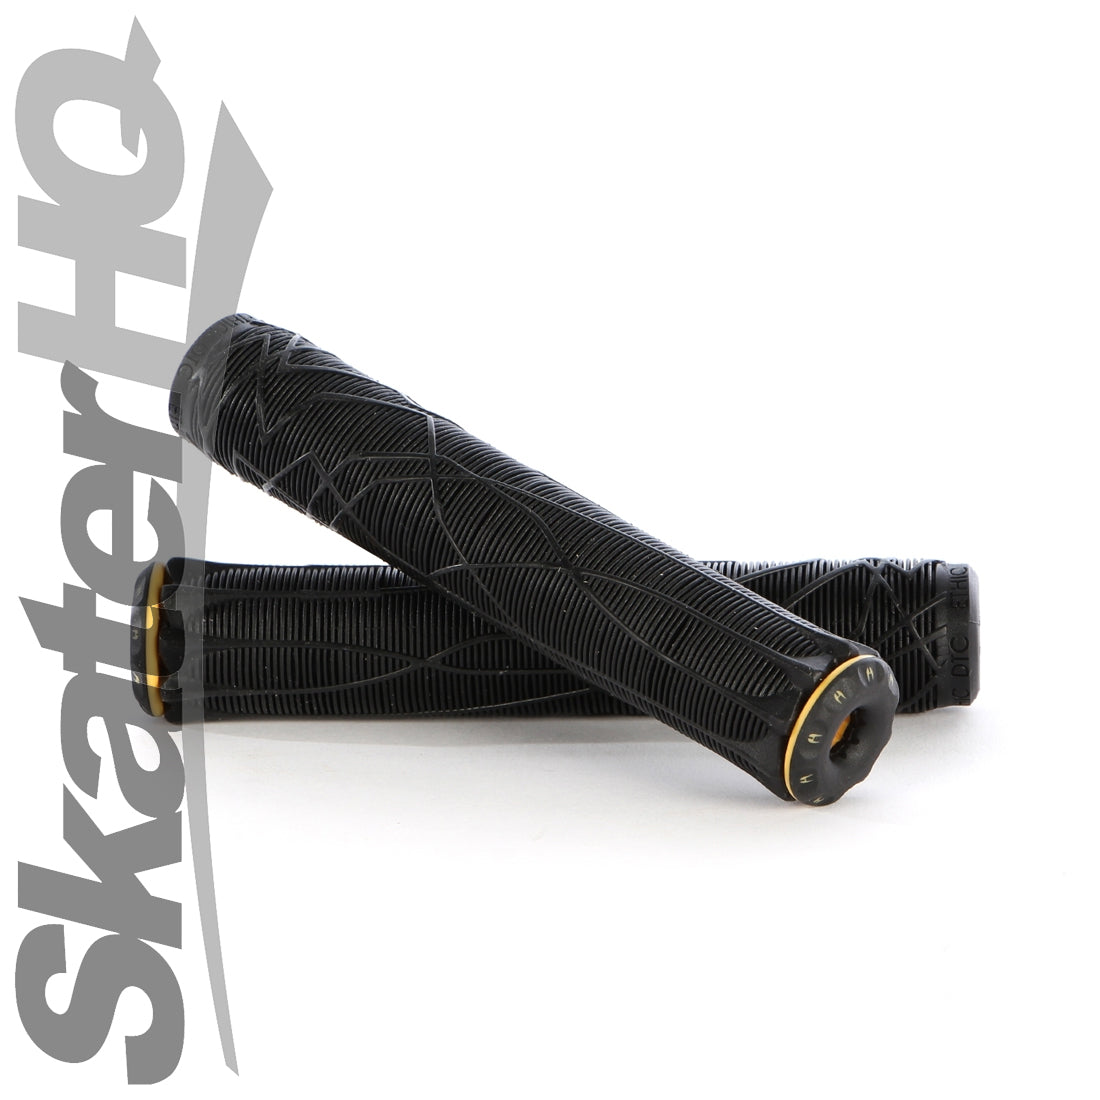 Ethic DTC Handle Grips - Black Scooter Grips